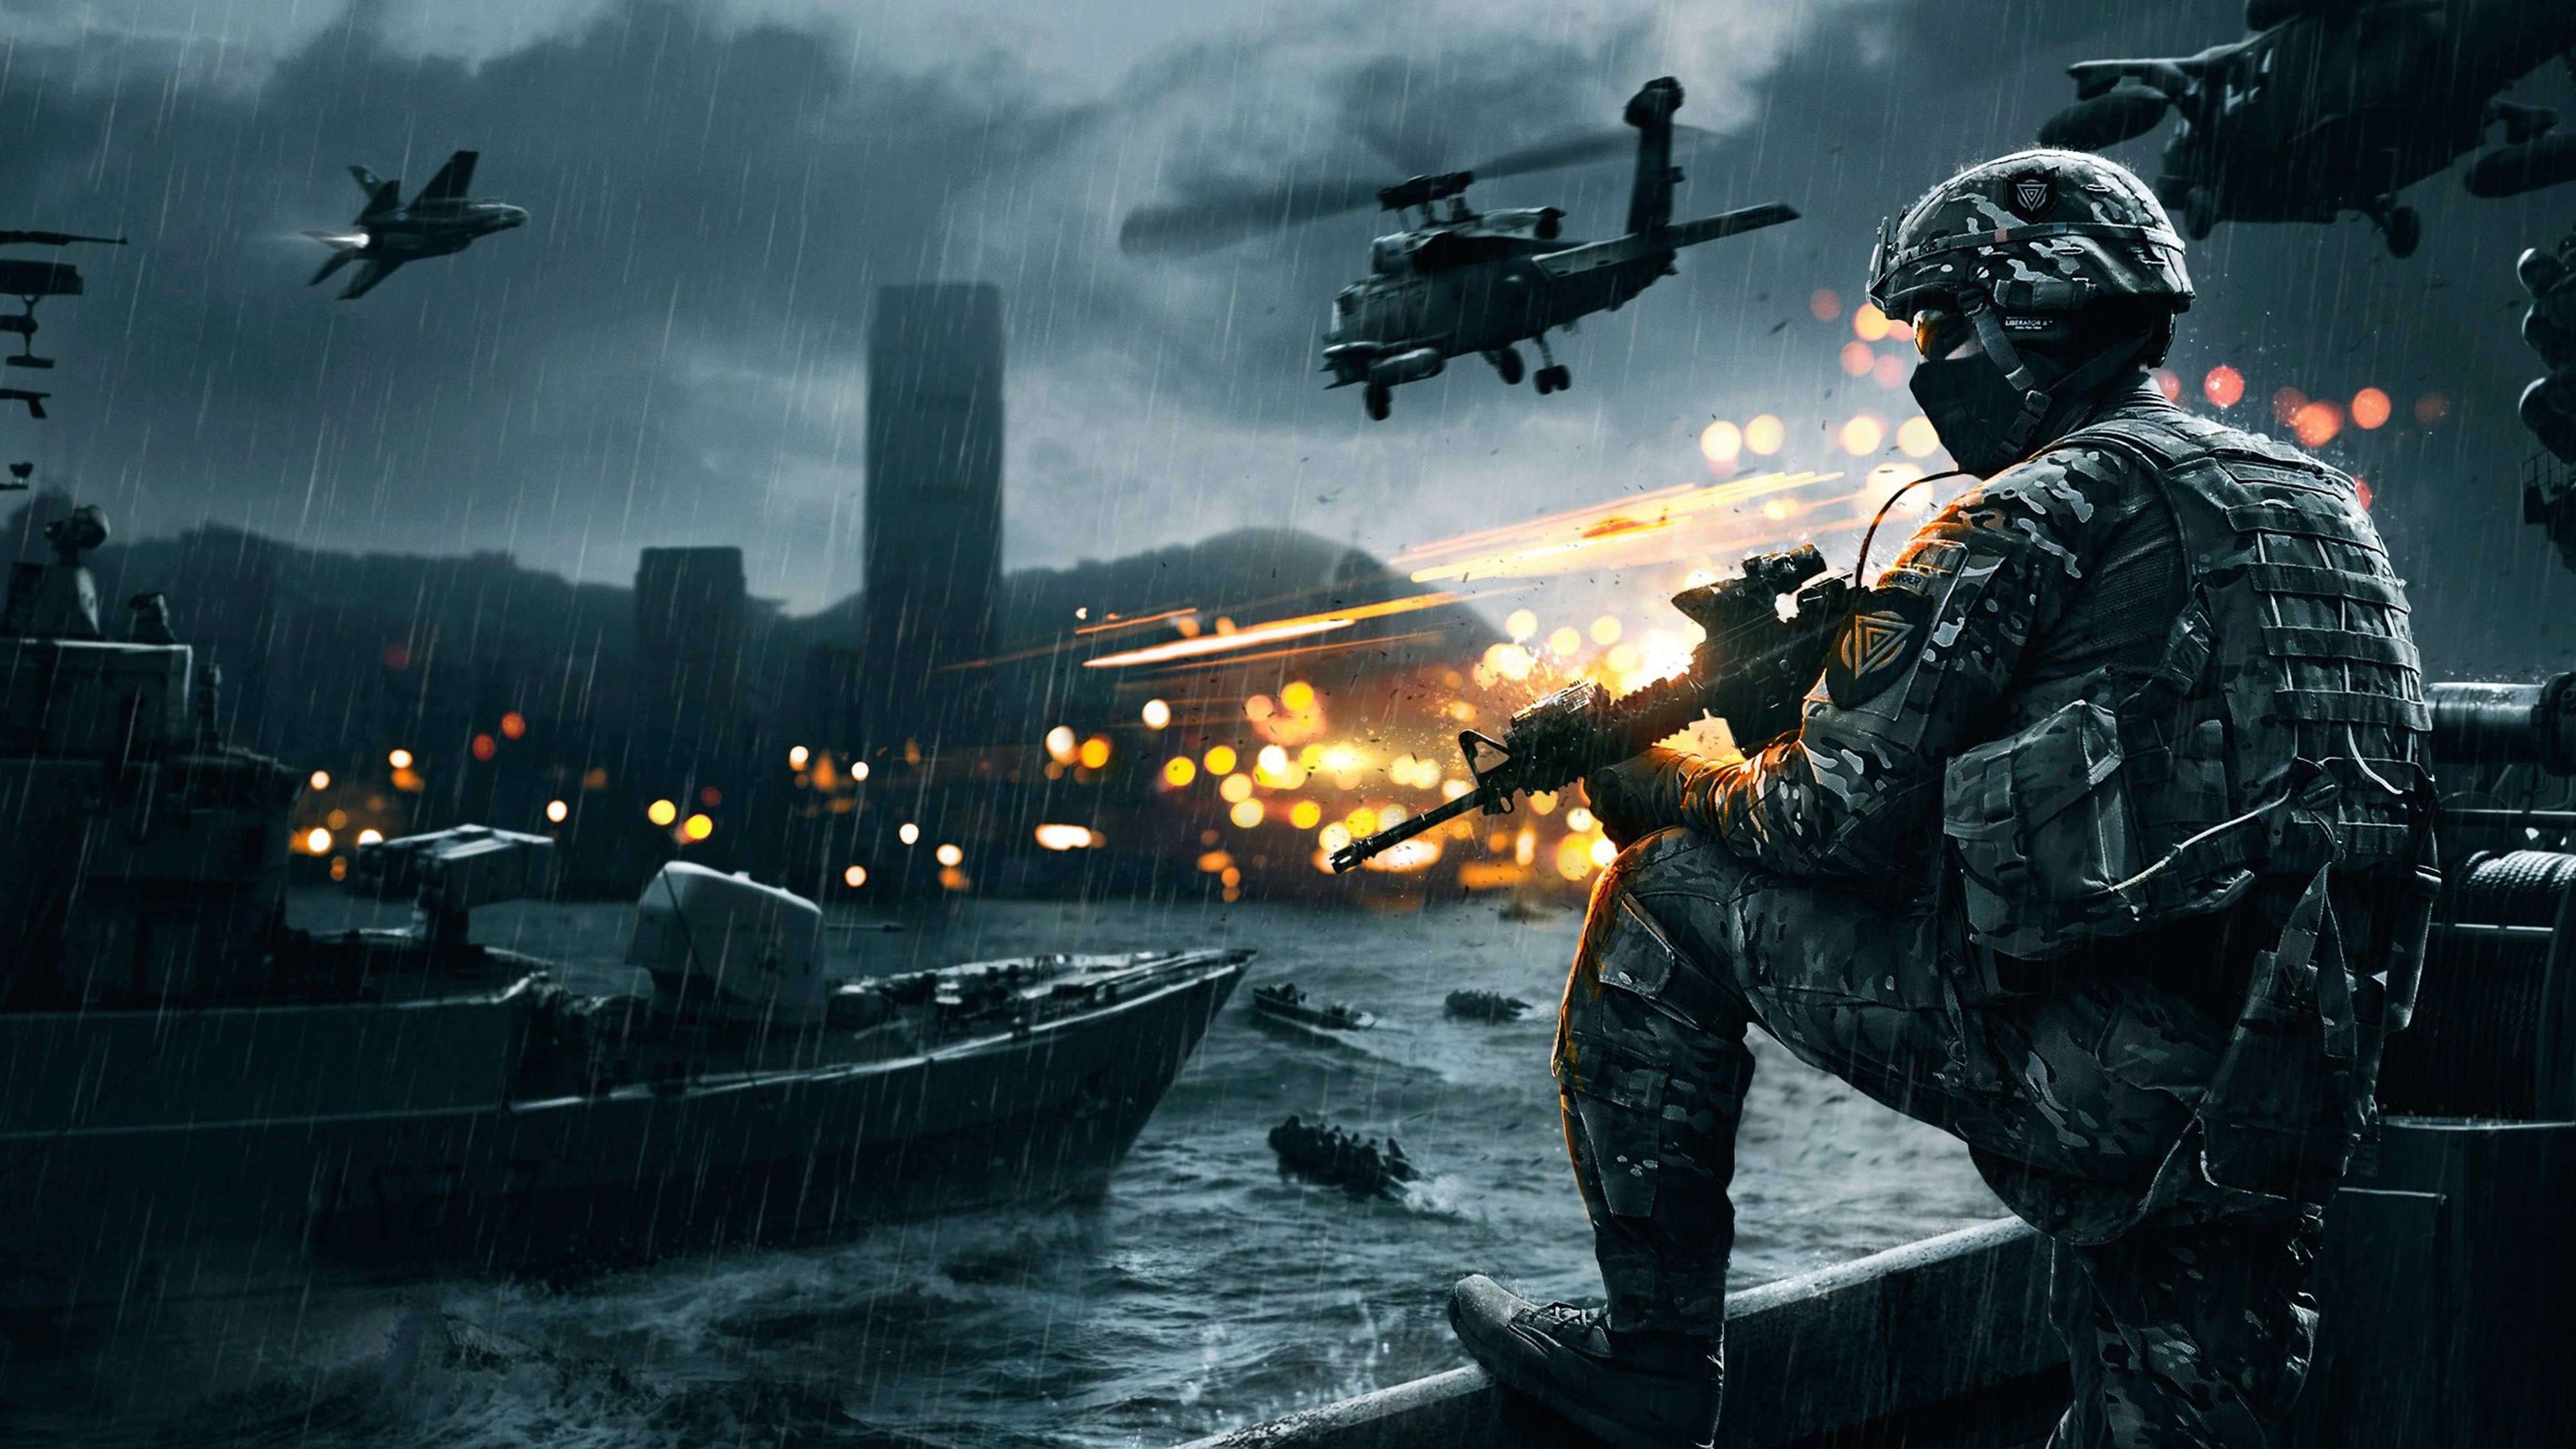 Helicopter Battlefield 4 4000x2250